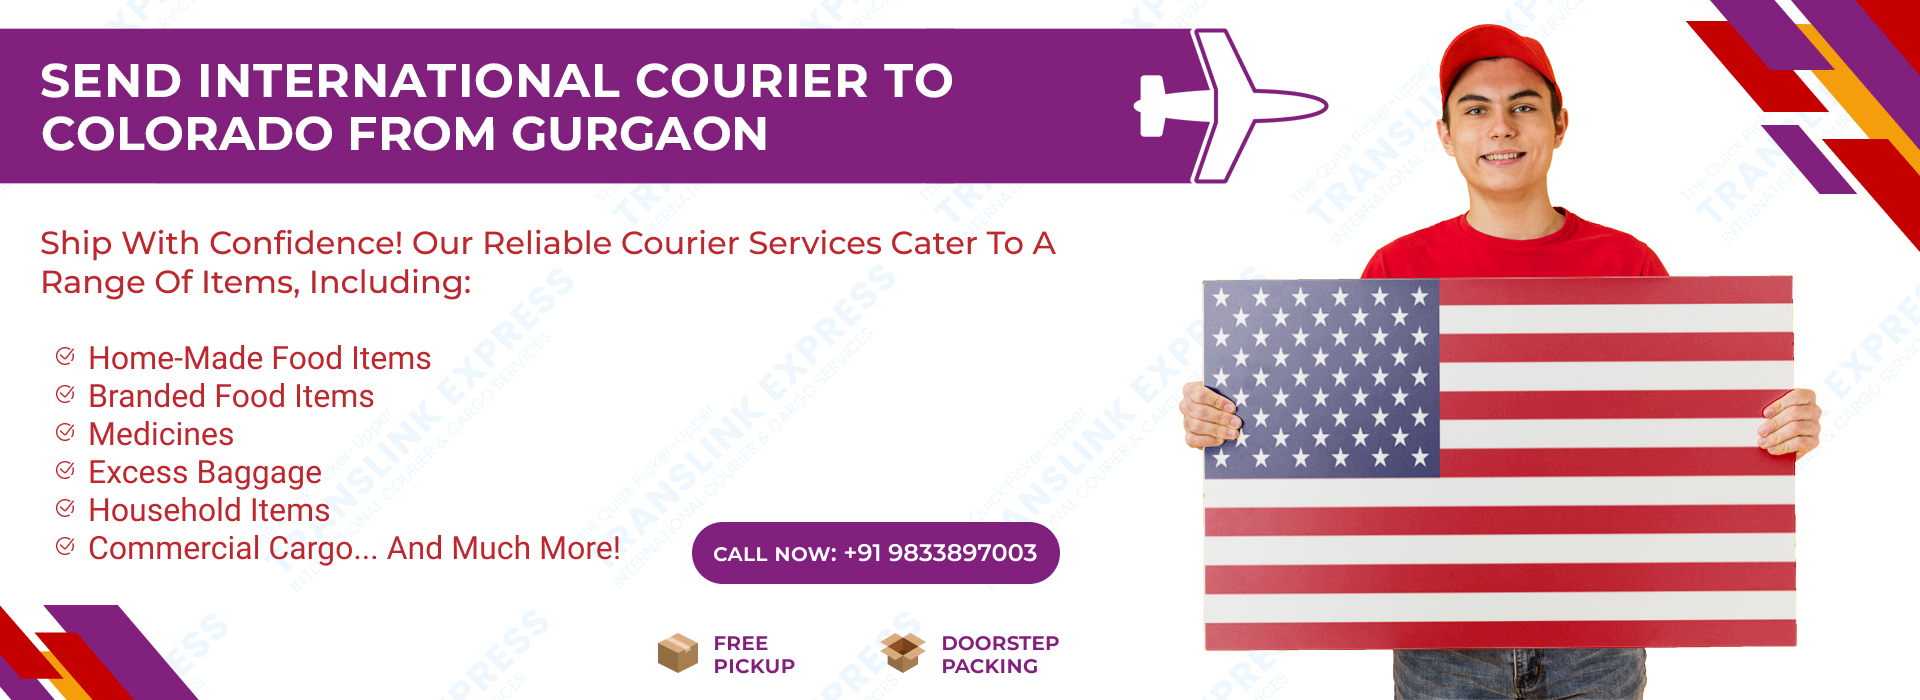 Courier to Colorado From Gurgaon